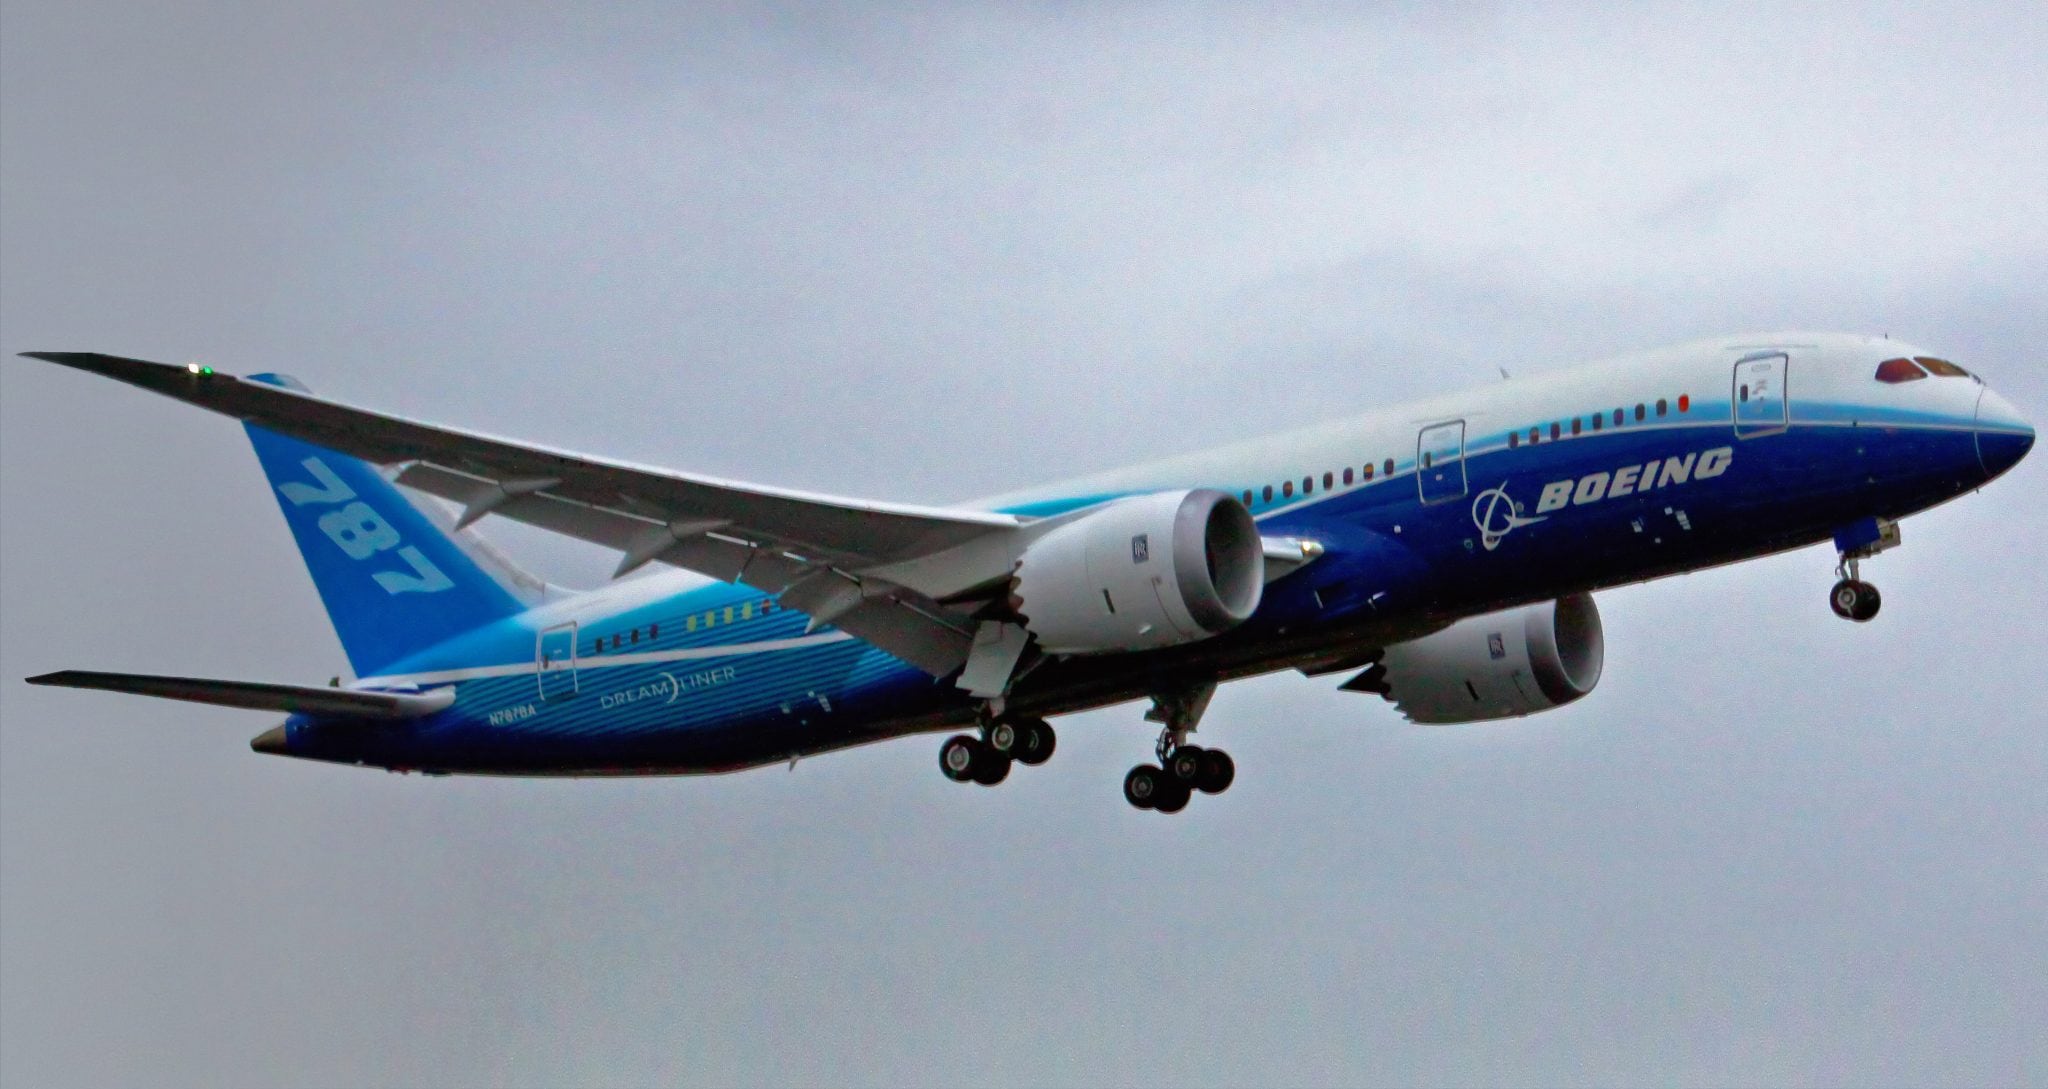 First flight of the 787. (Wikipedia)